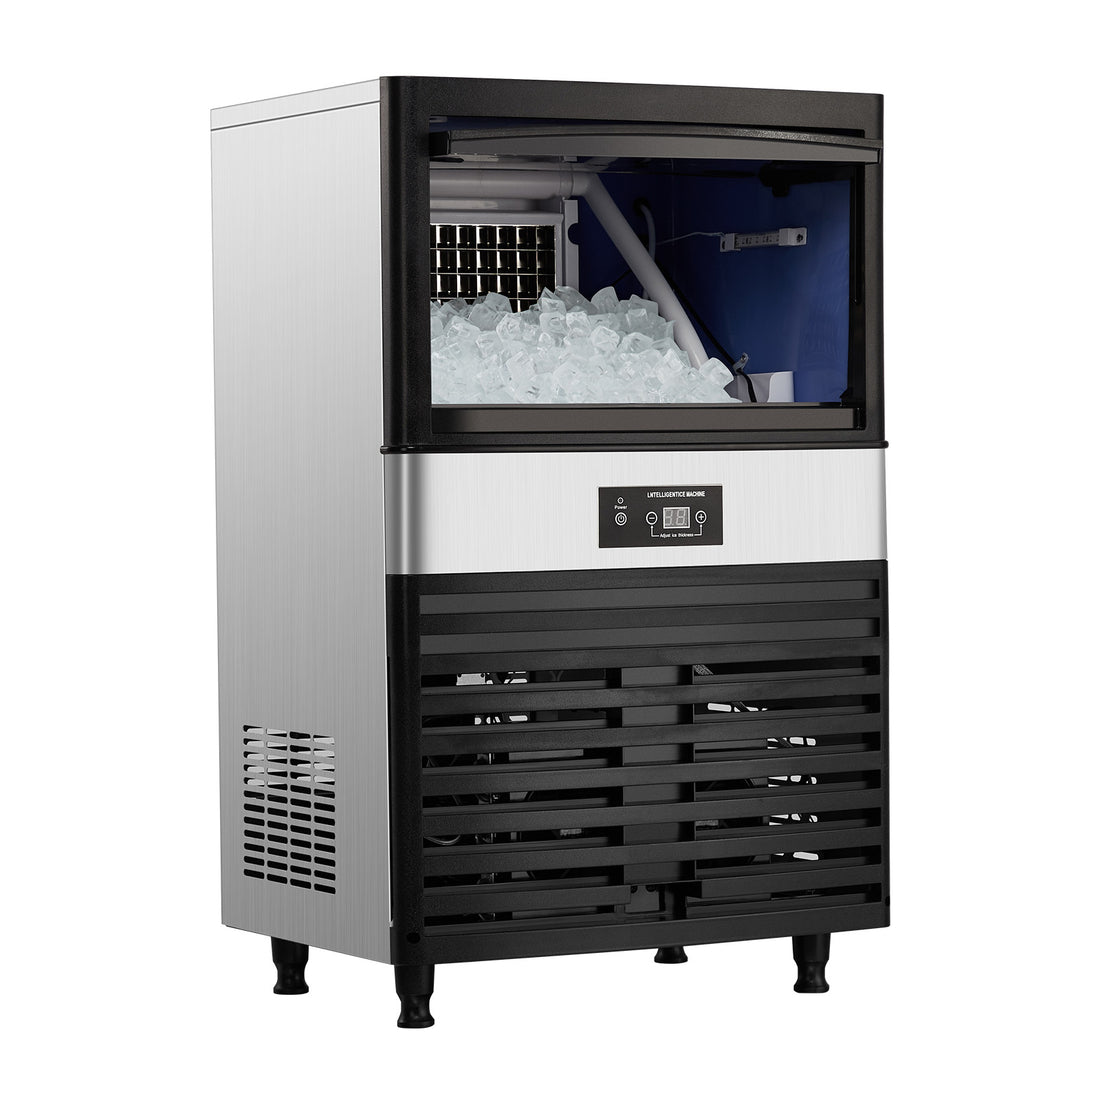 GARVEE Commercial Ice Maker Machine 160lbs/24H with 44lbs Storage Bin 304 Stainless Steel Under Counter Ice Maker for Homes Restaurants Bars Hotels